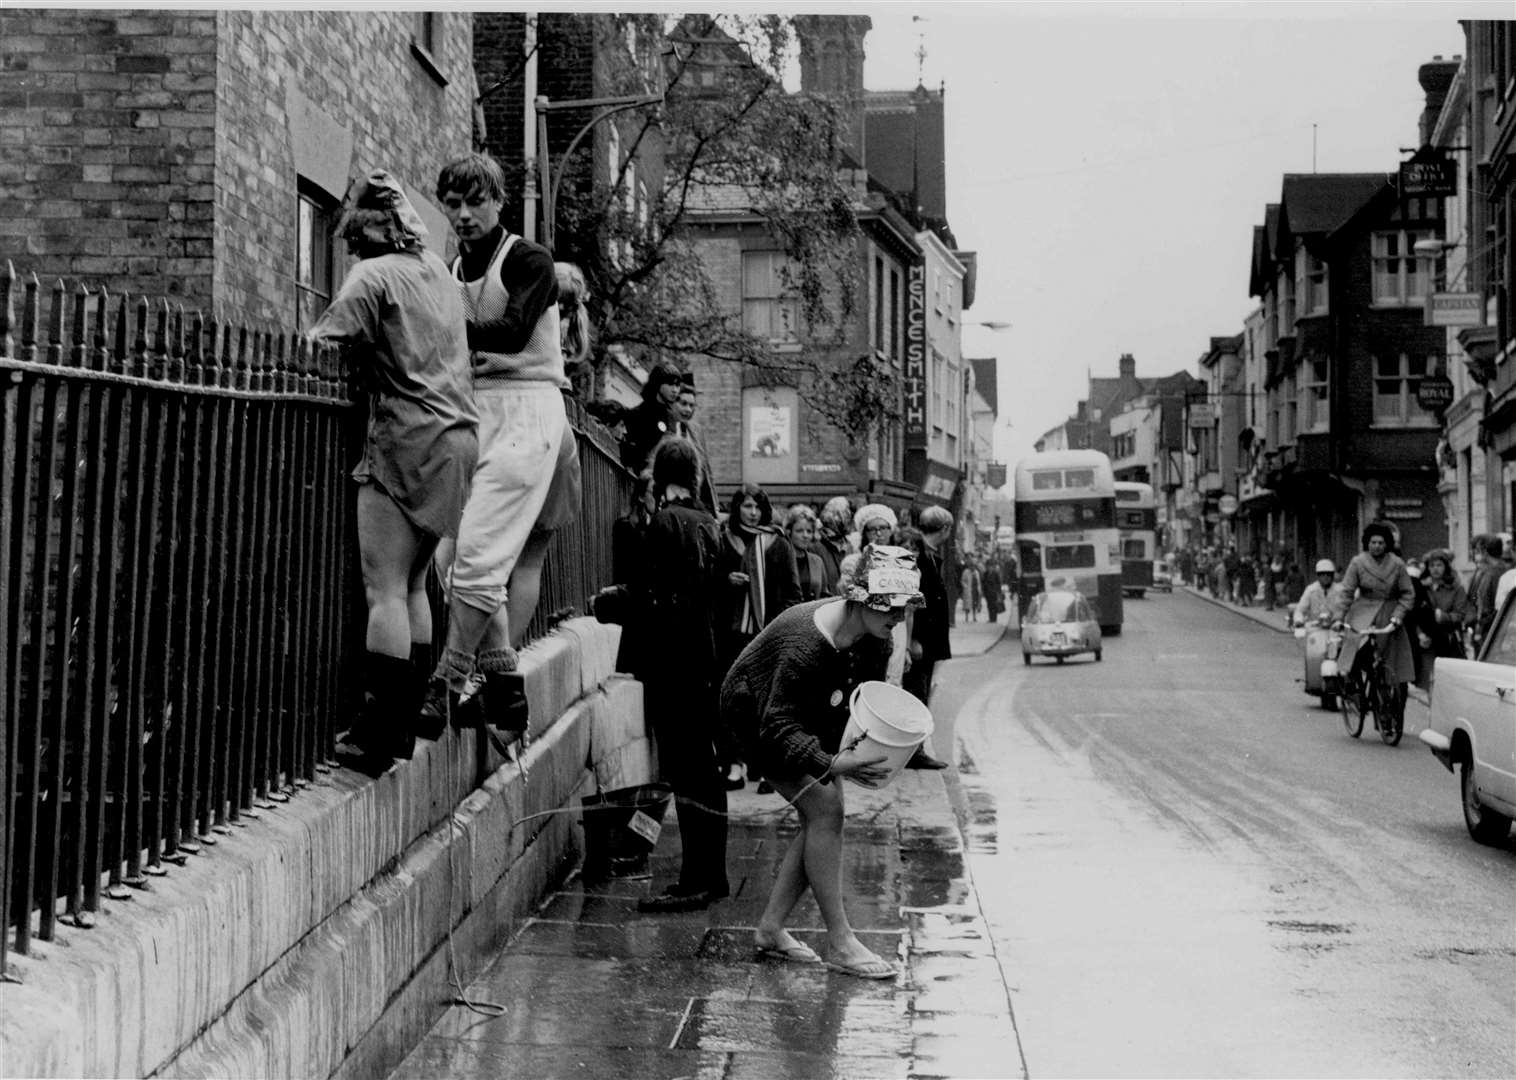 A vain attempt is made to empty the River Stour with buckets at the King's Bridge during 'rag week' in May 1965, when students from Christ Church College, Wye and Nonington Colleges took part in stunts around Canterbury